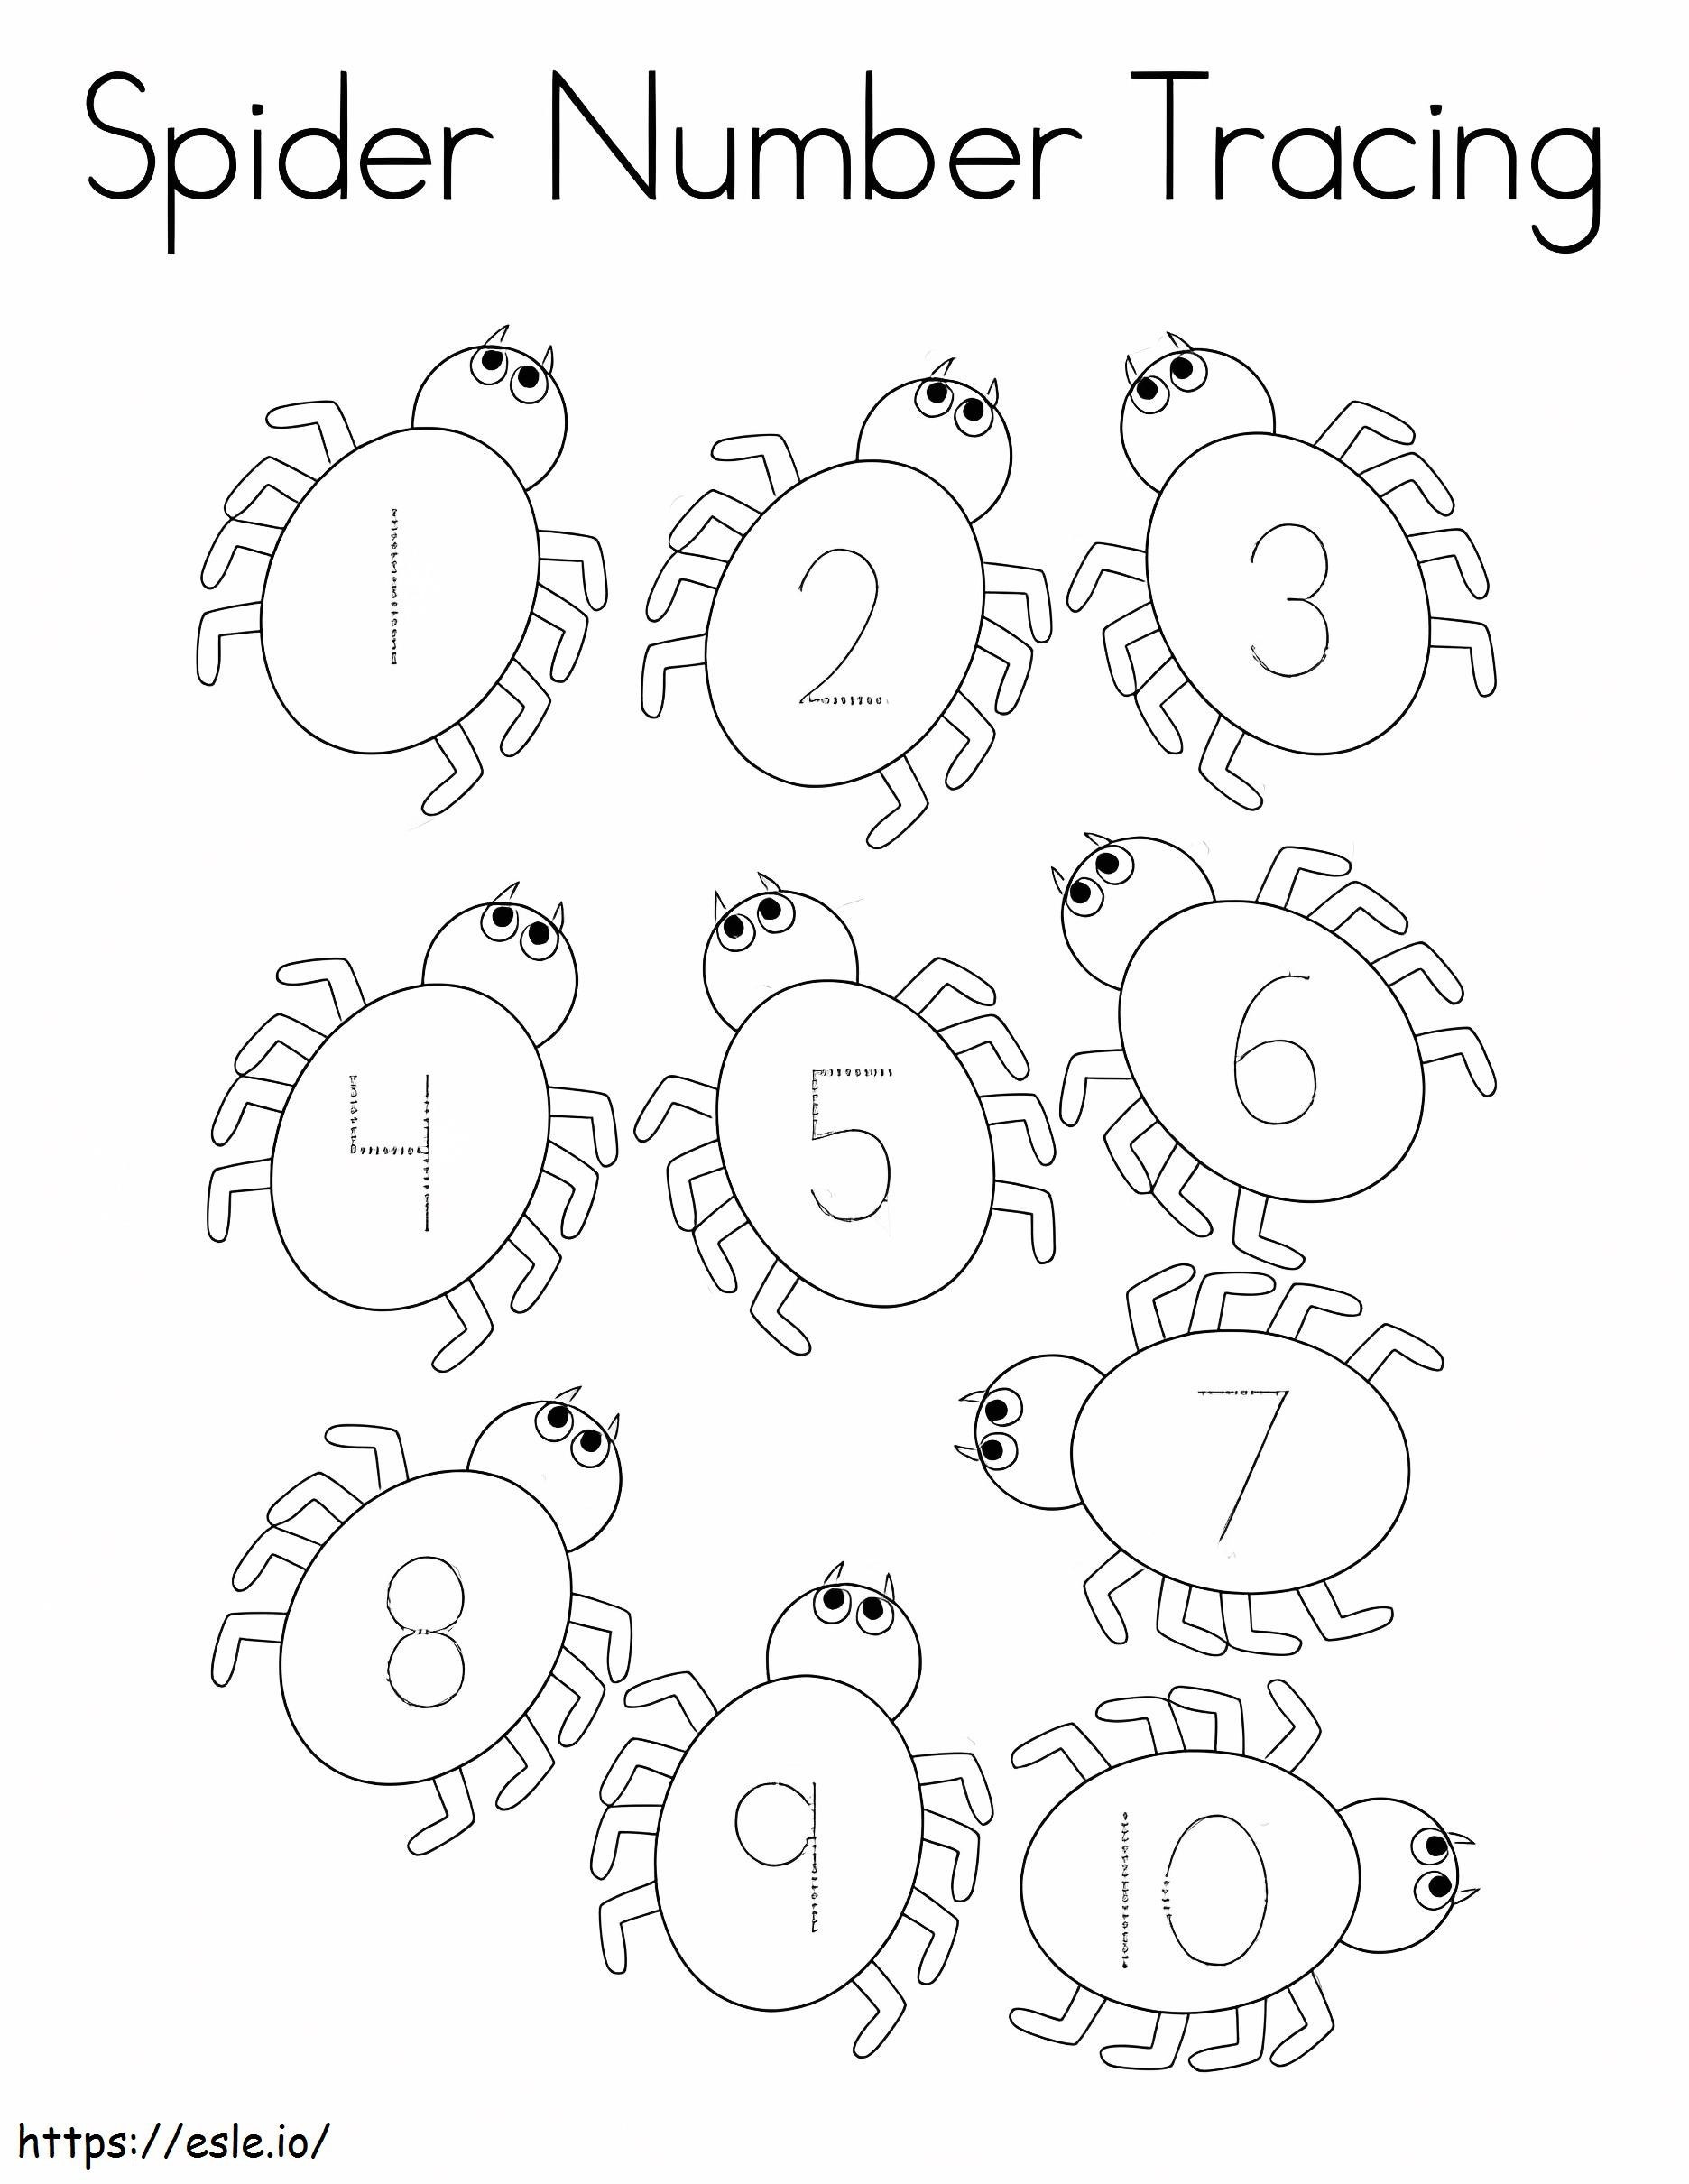 Spider Number Tracing coloring page